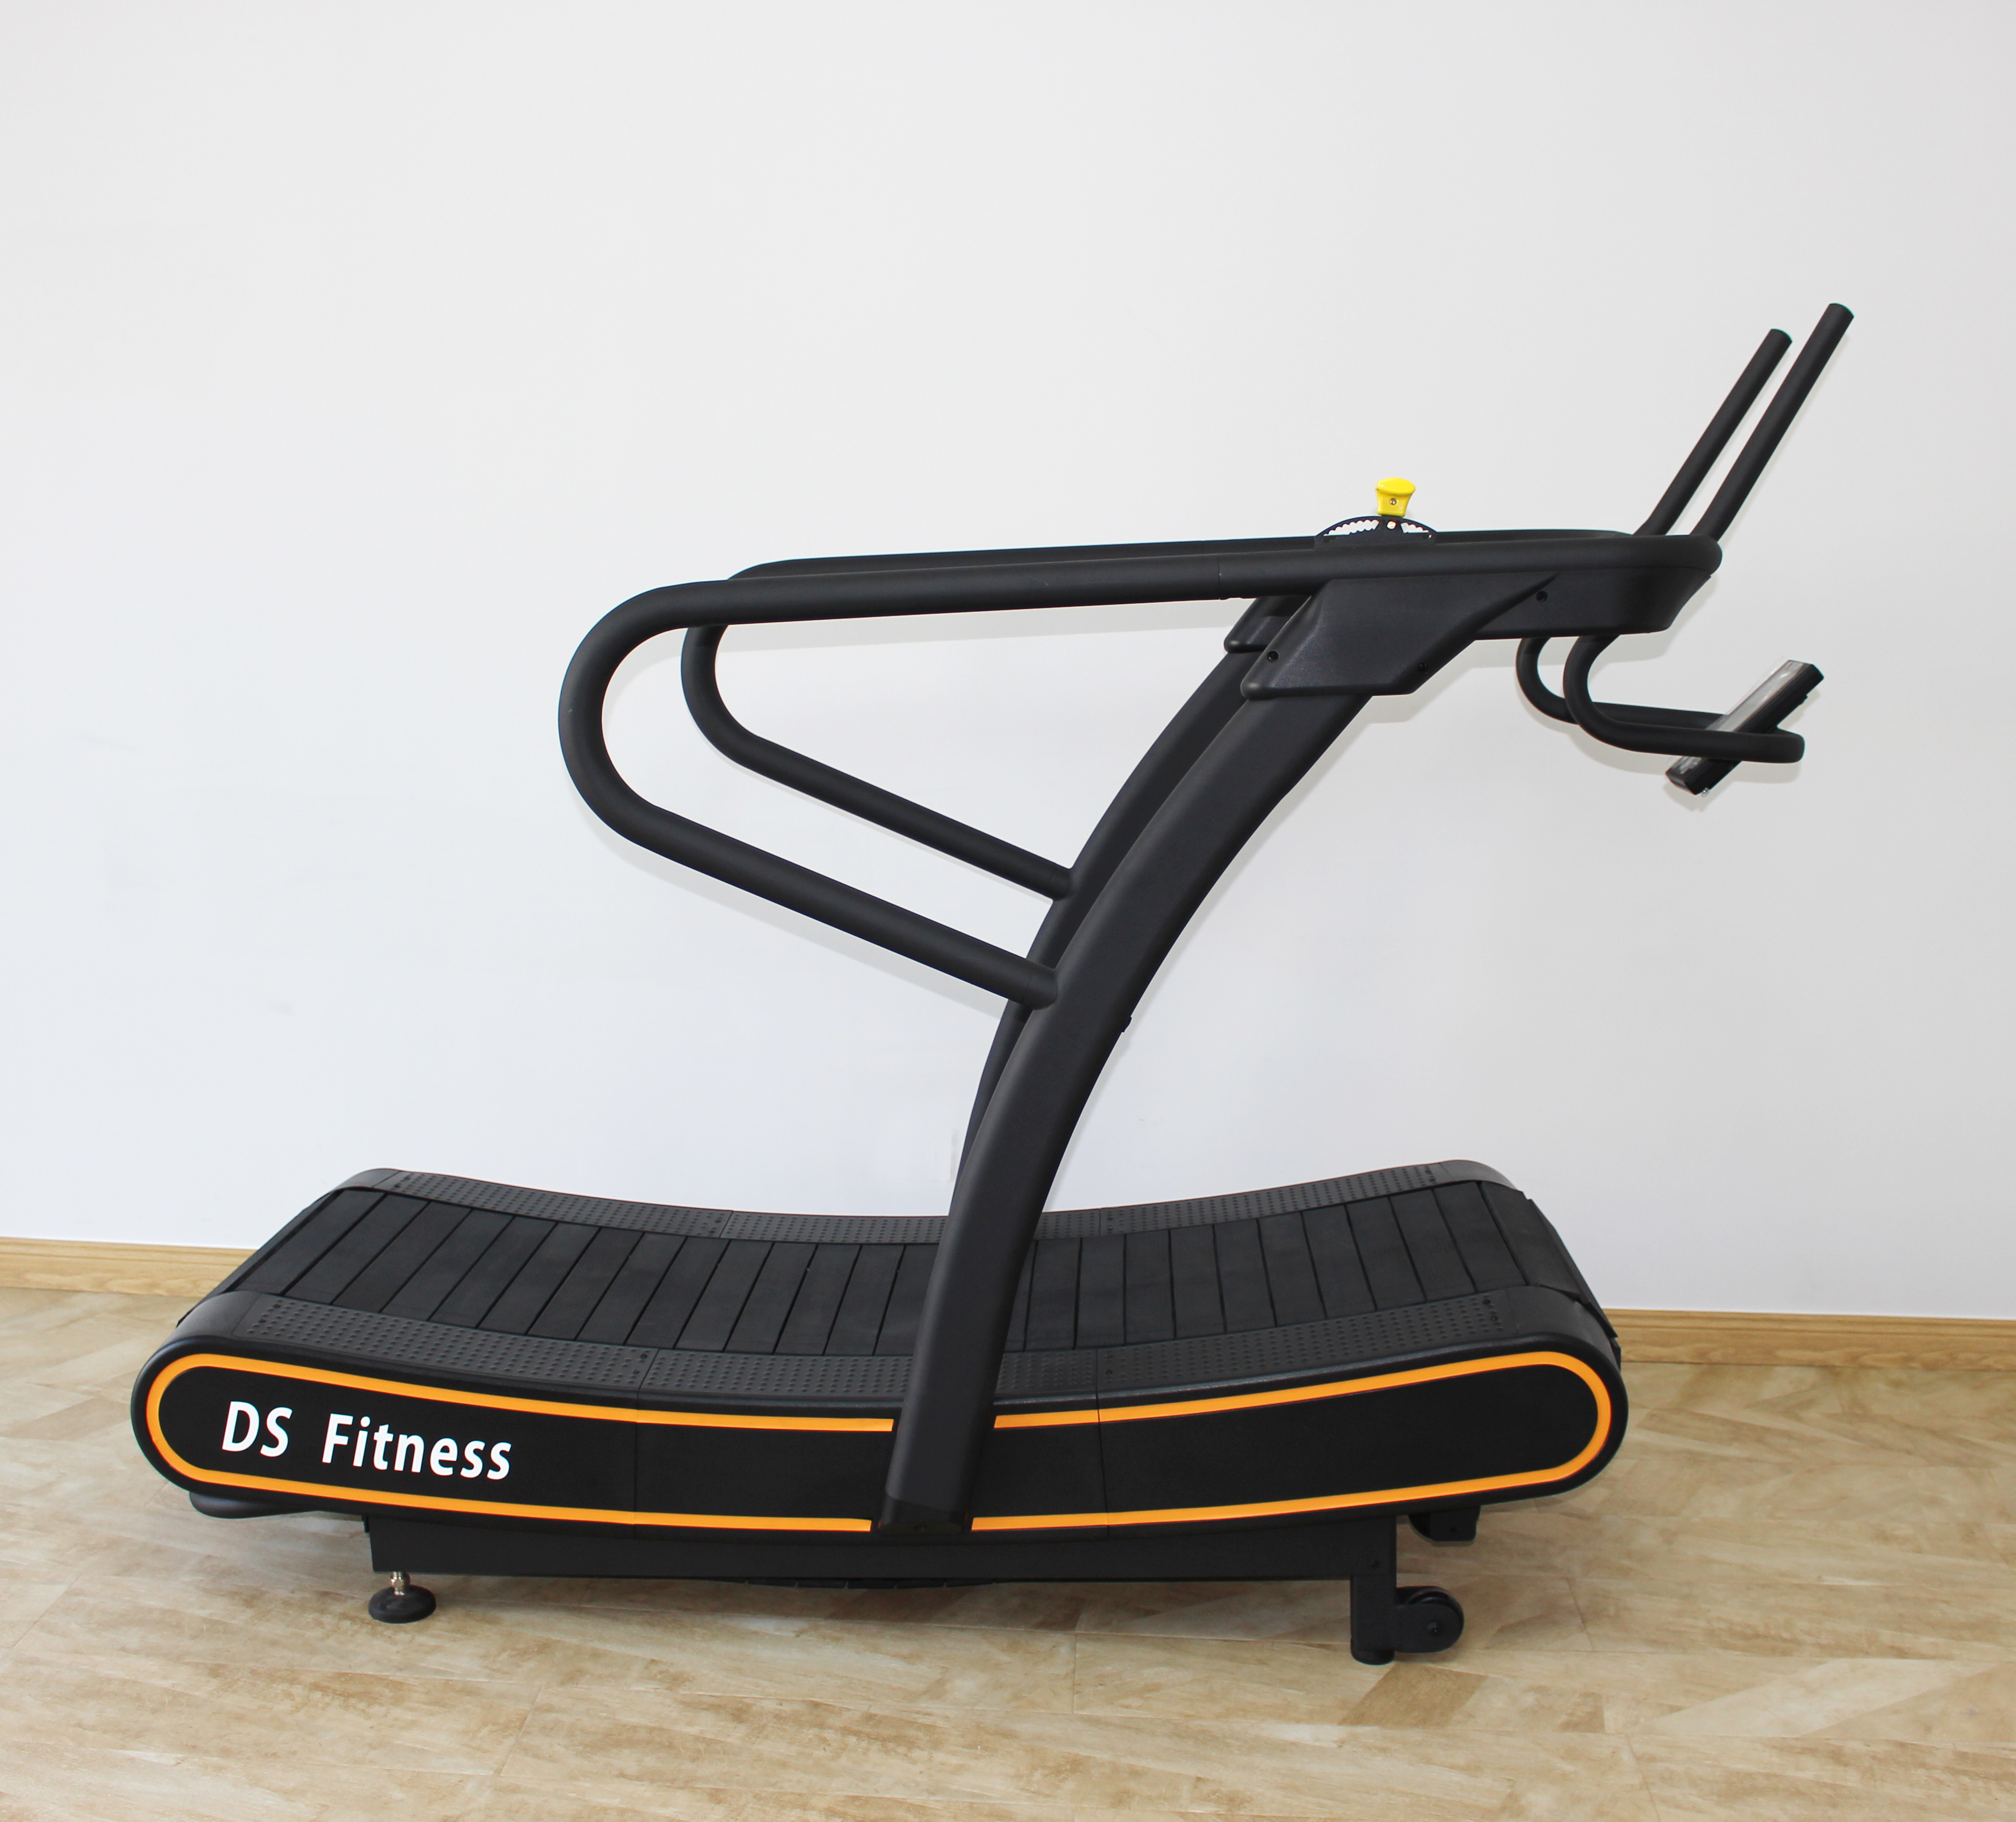 Motorless Convenient Home Resistance Curved Treadmill